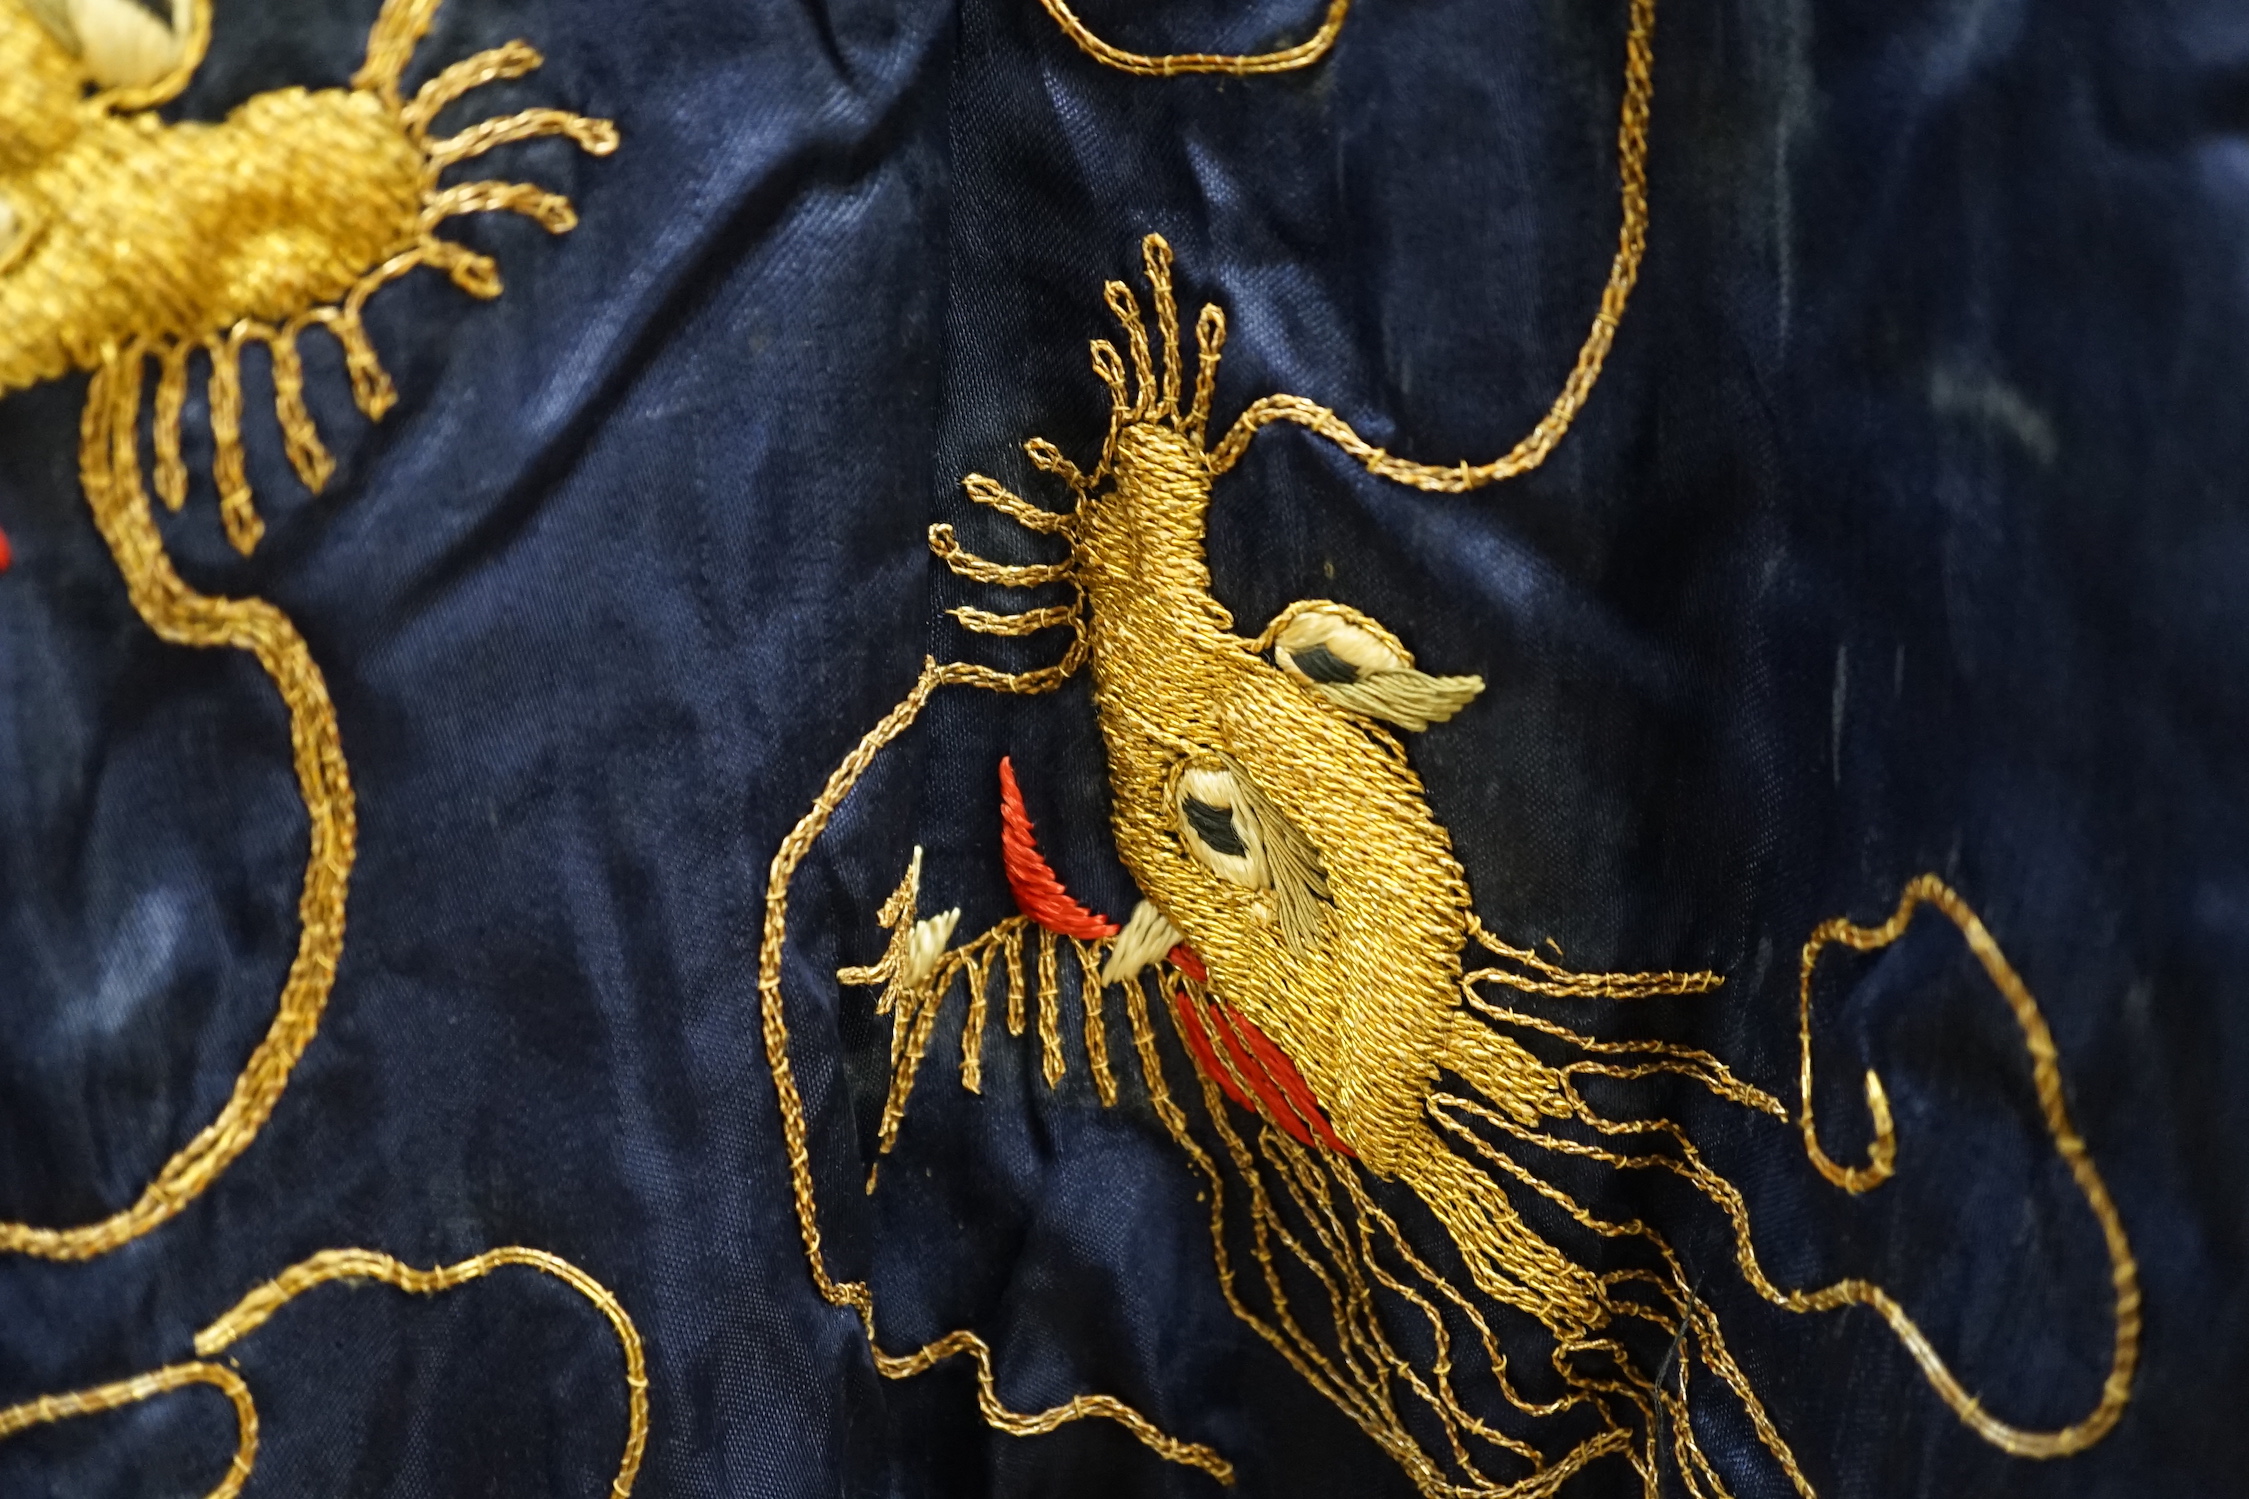 A Japanese ‘dragon’ robe with gold thread